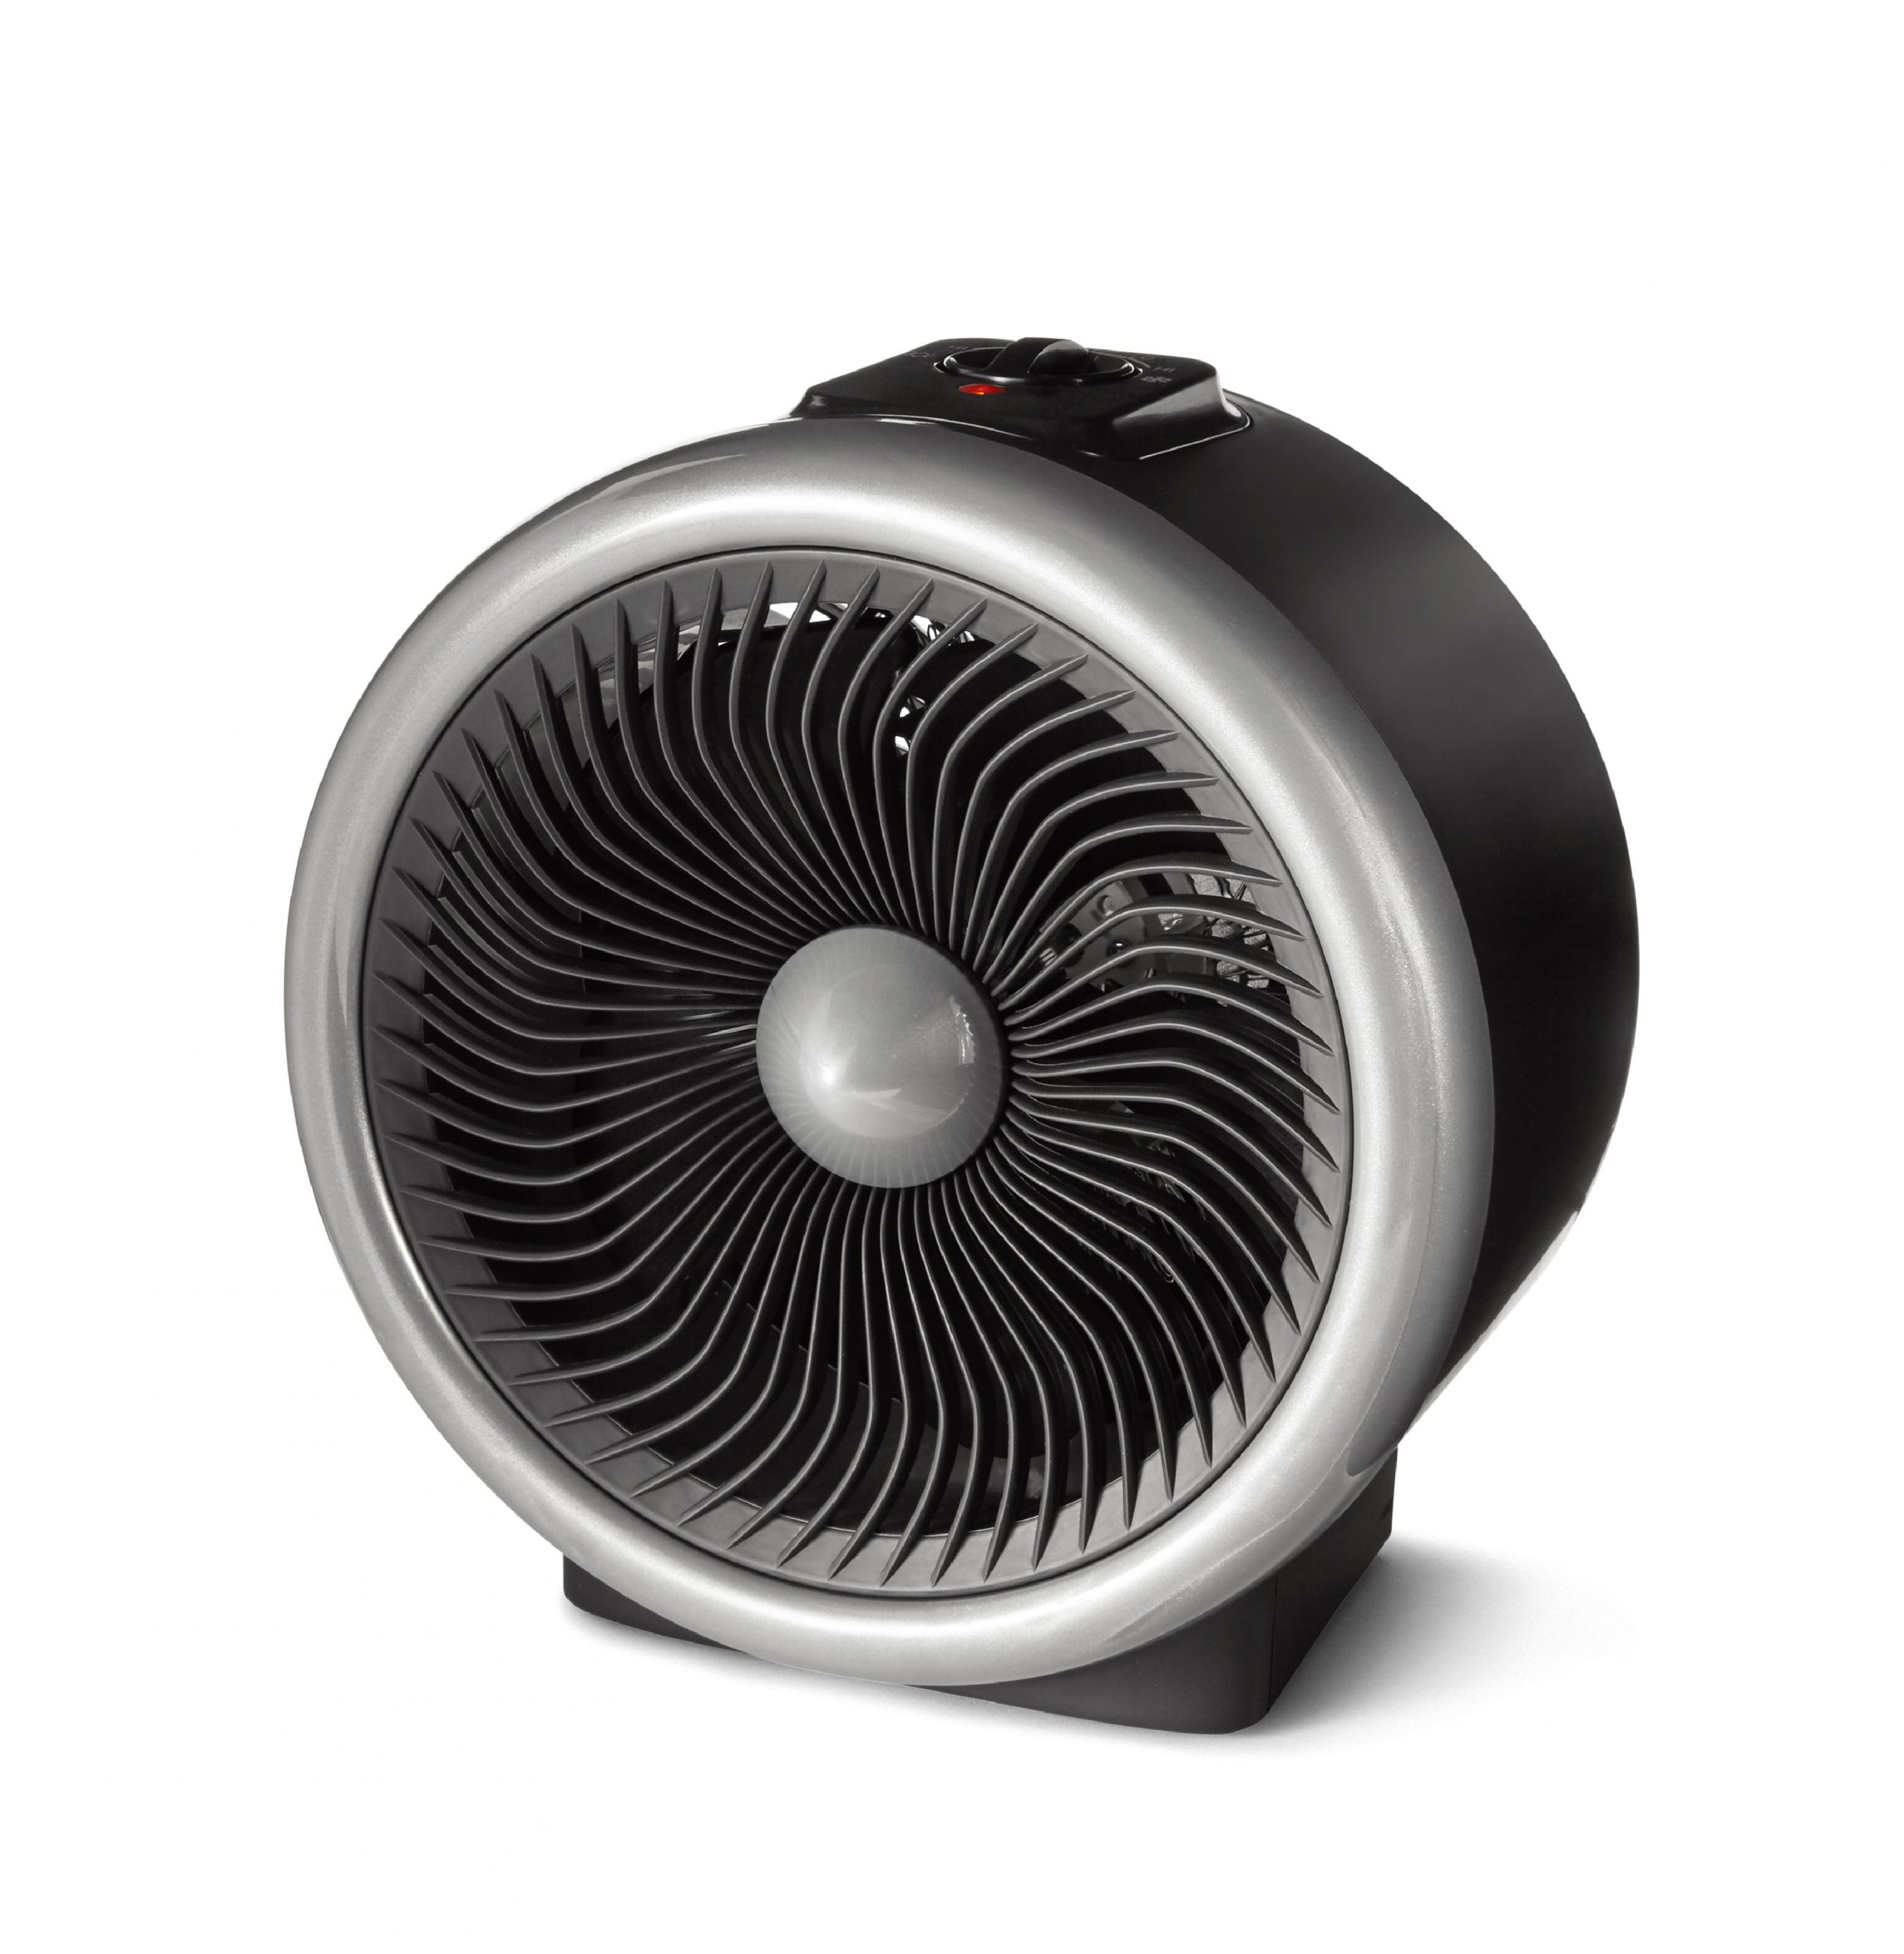 Mainstays 2 In 1 Portable Heater Fan 900 1500w Indoor Black Walmart pertaining to size 3164 X 3247